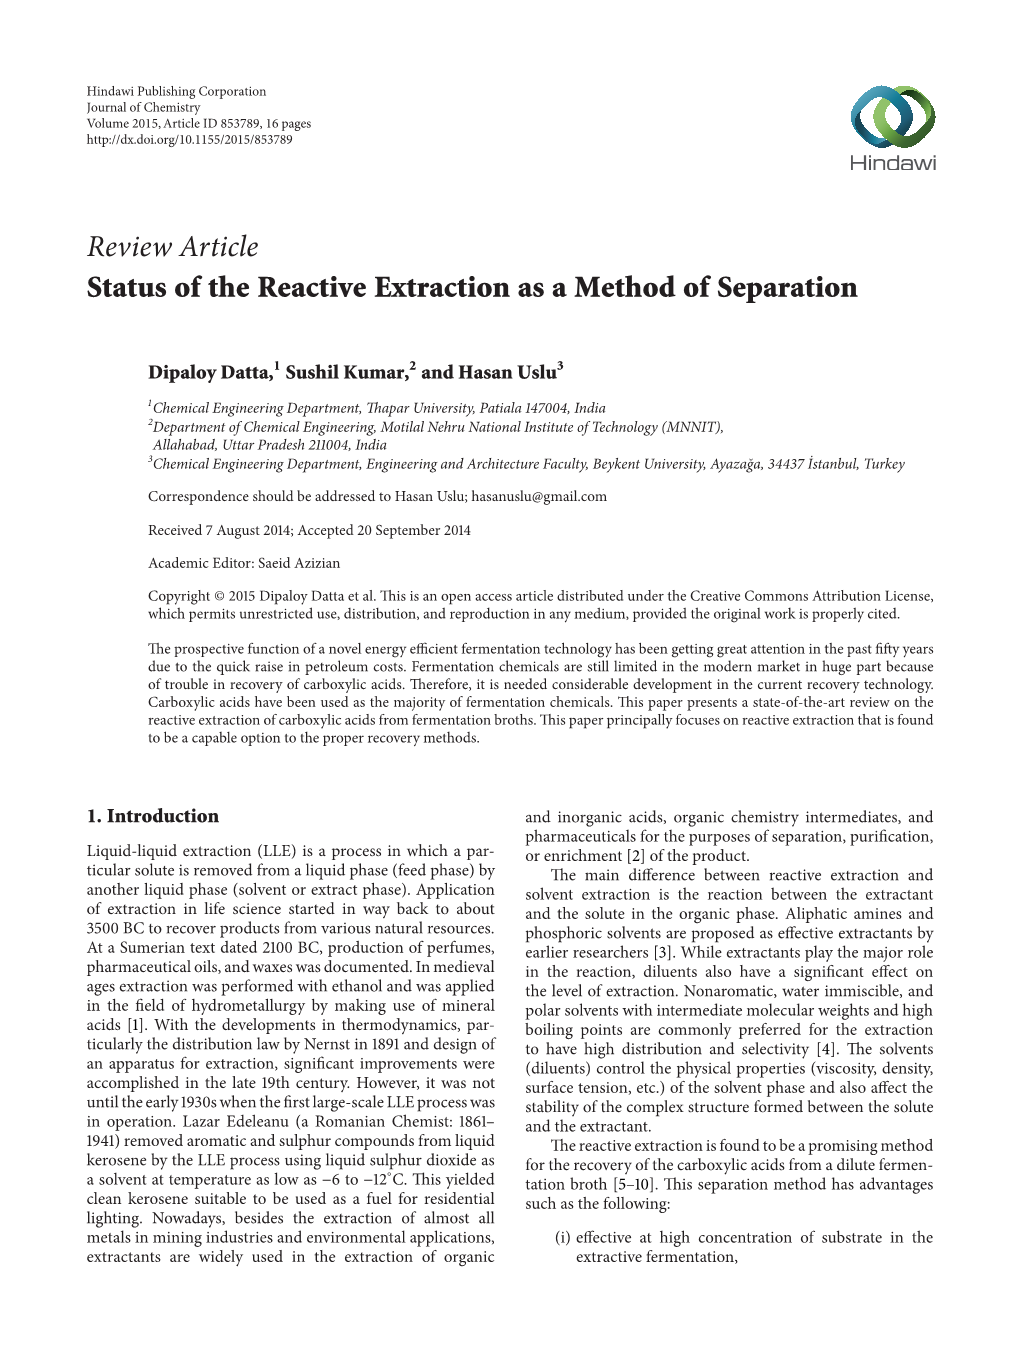 Review Article Status of the Reactive Extraction As a Method of Separation